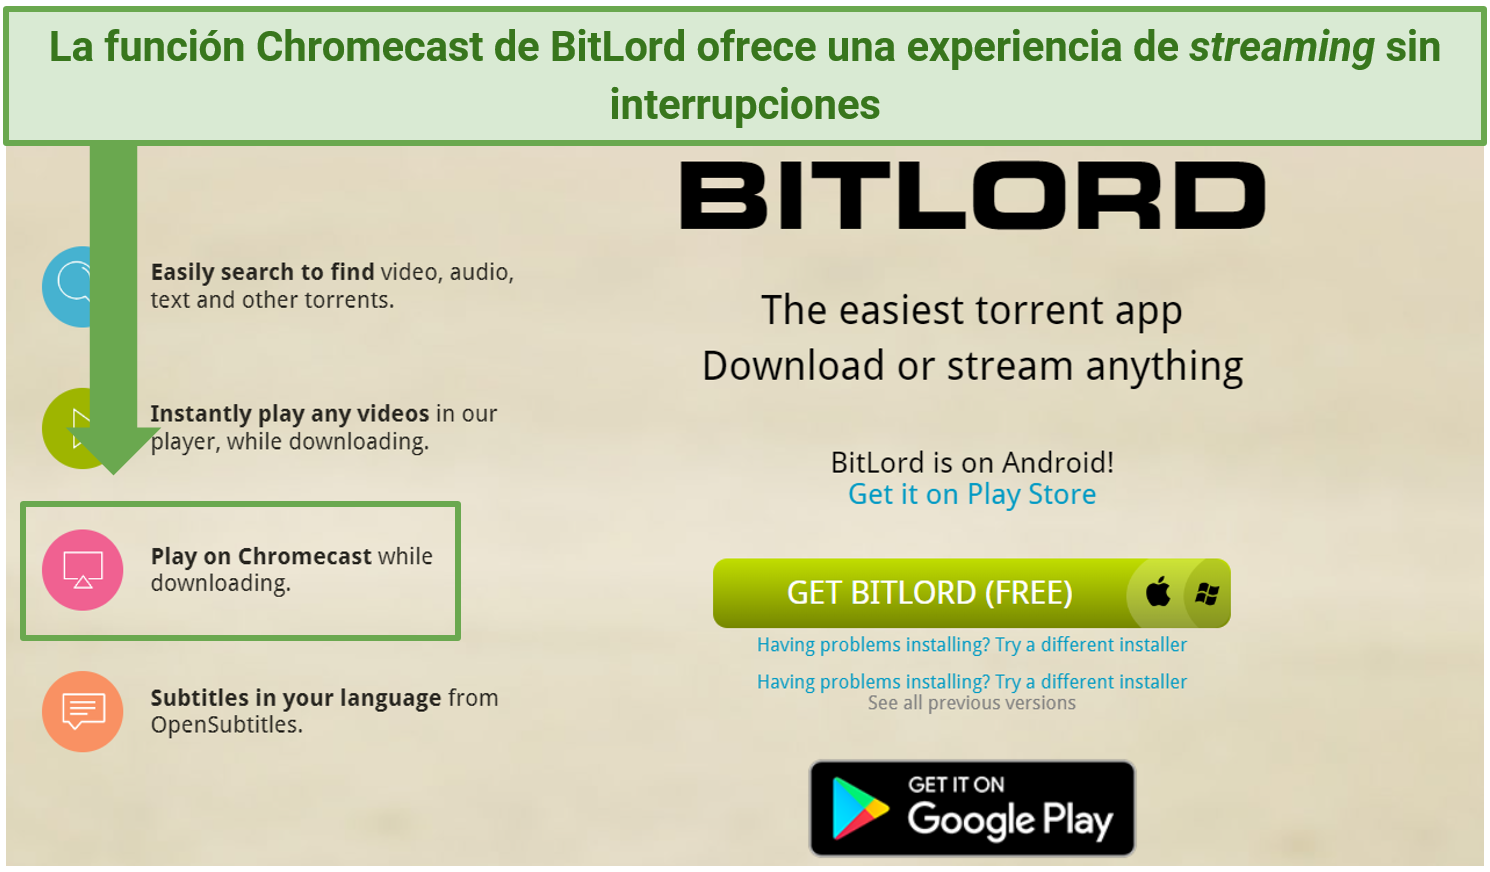 A screenshot showing BitLord's Play on Chromecast feature